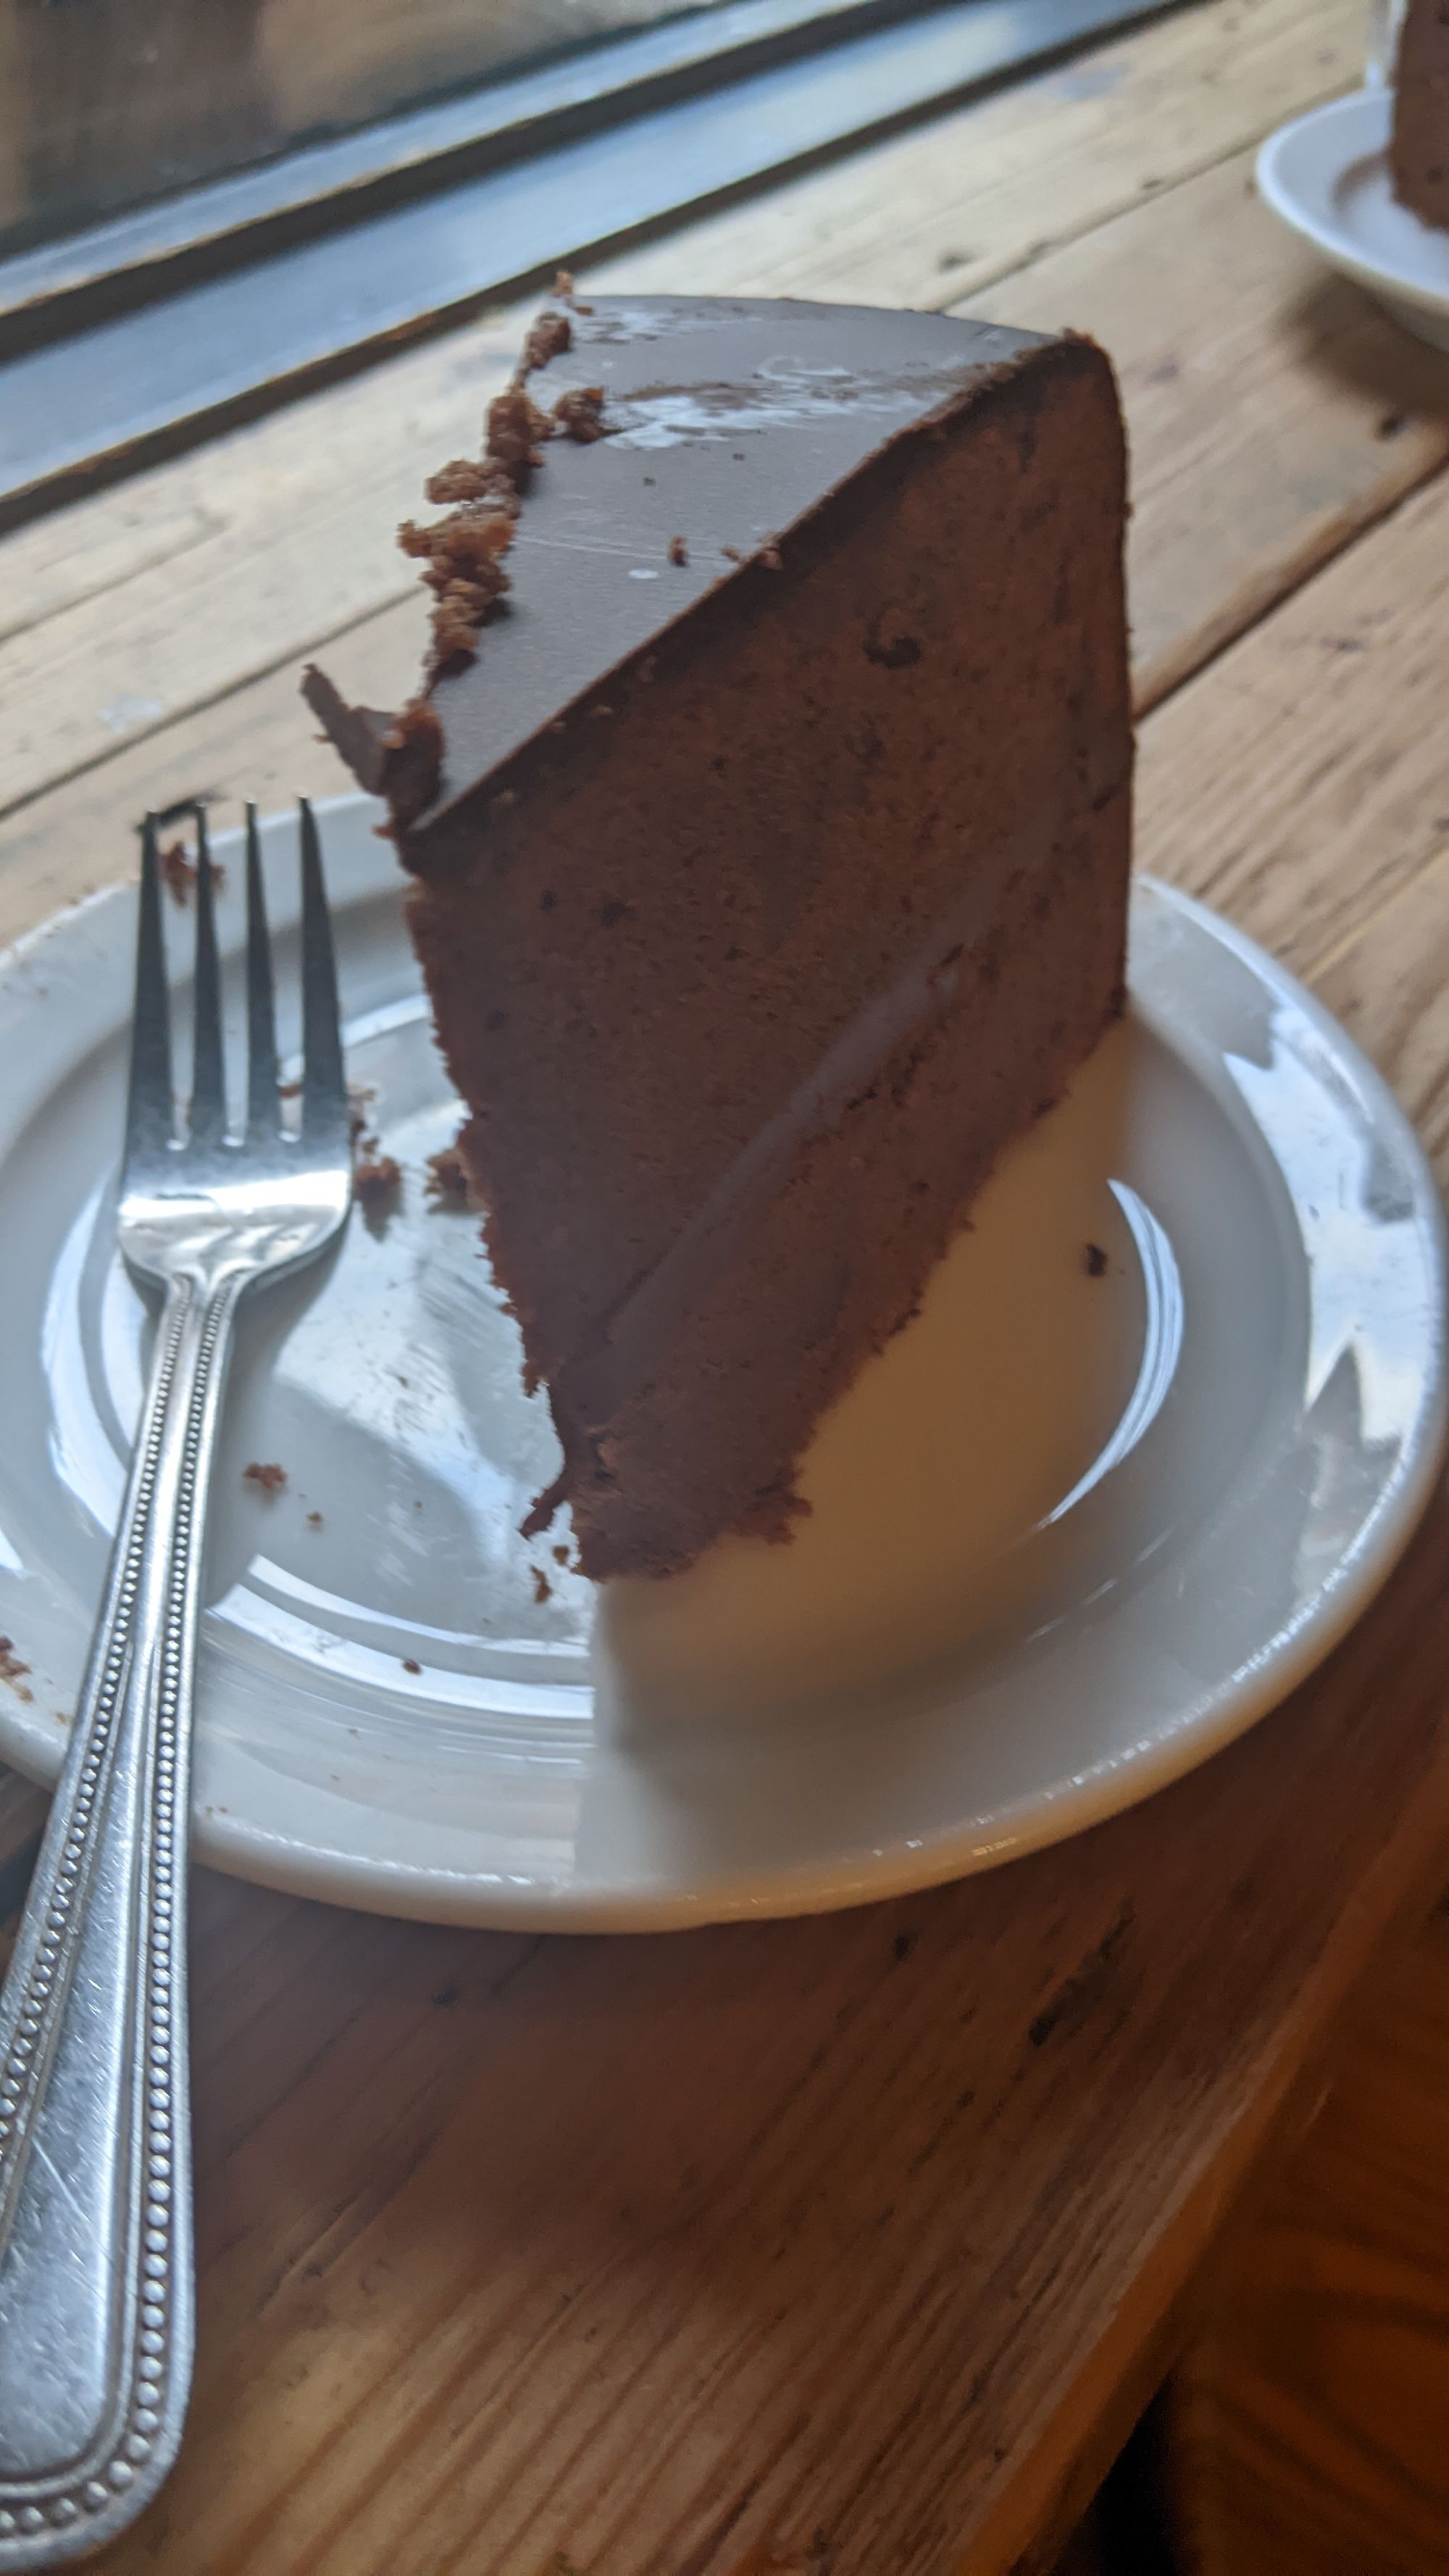 Picture of a chocolate cake